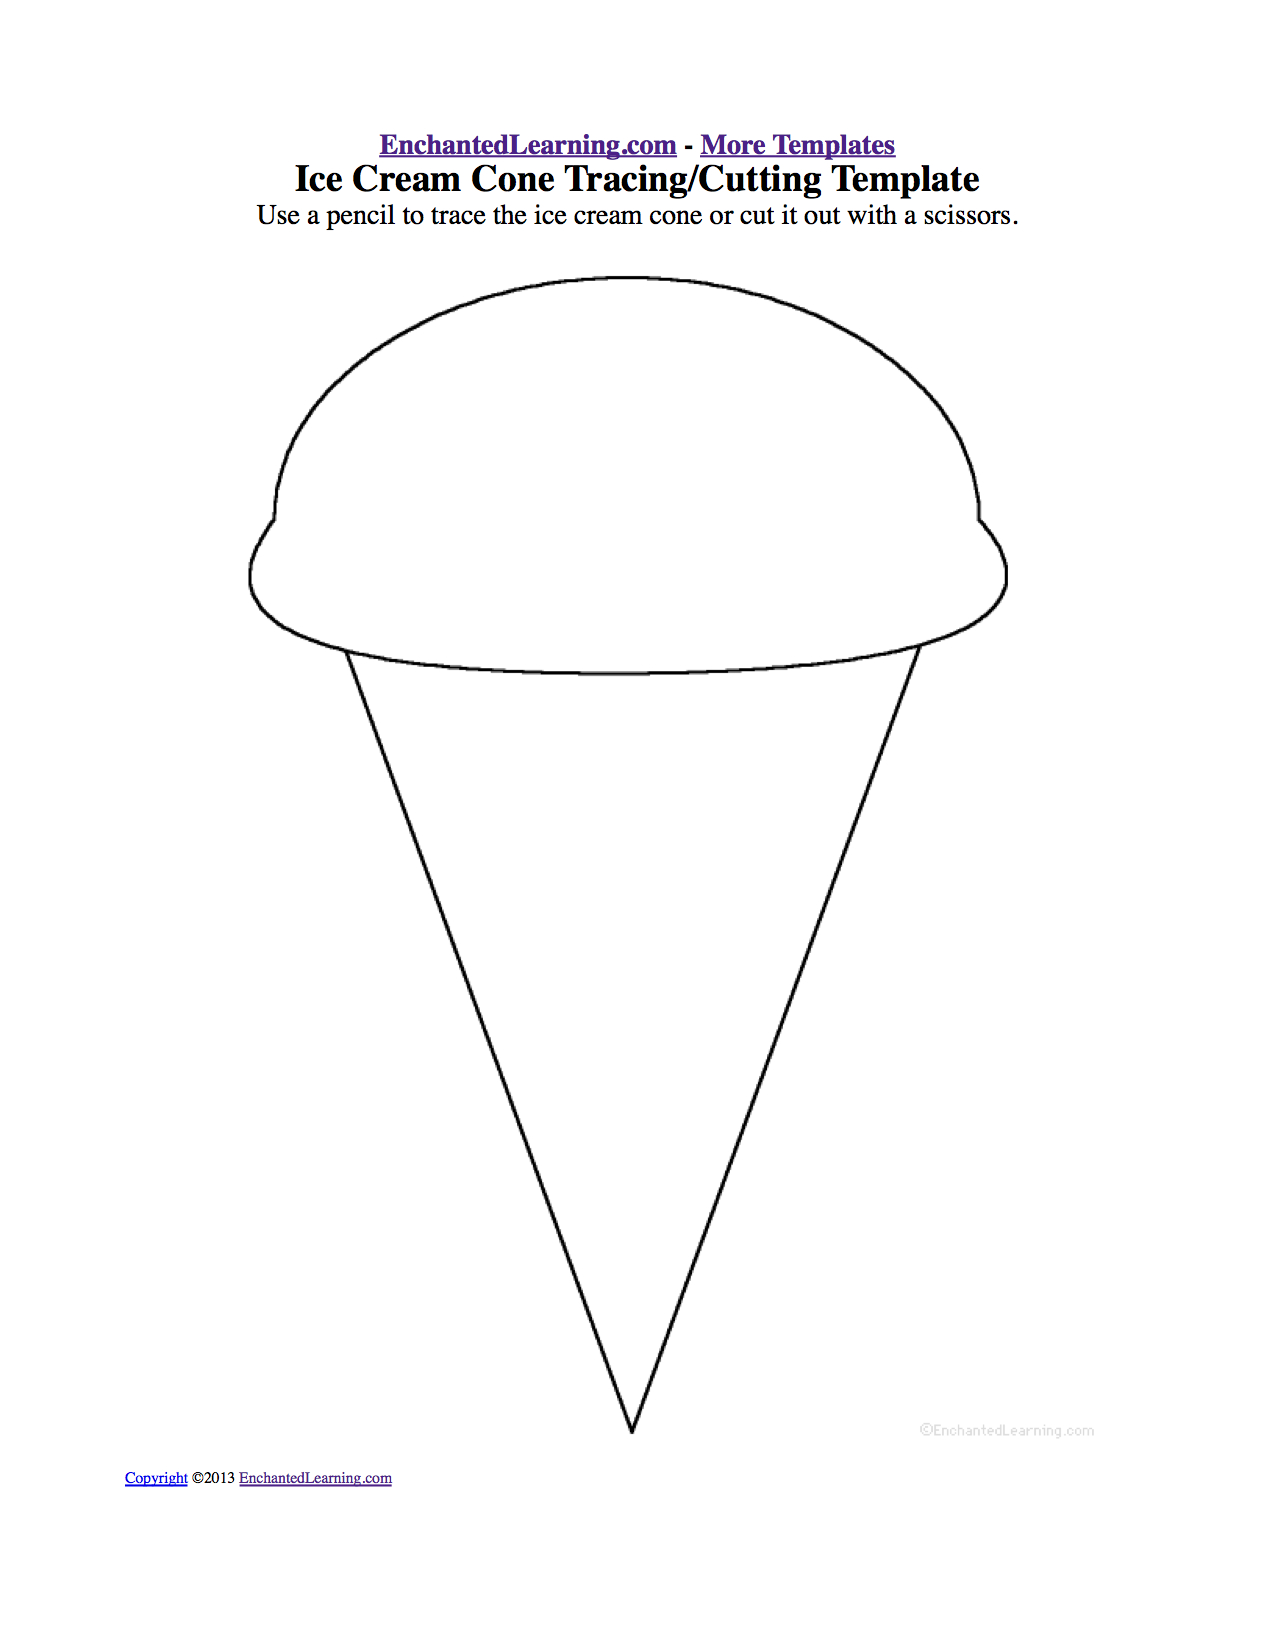 Dinner Plate Coloring Page Drawing And Coloring Worksheets Food Theme Page At